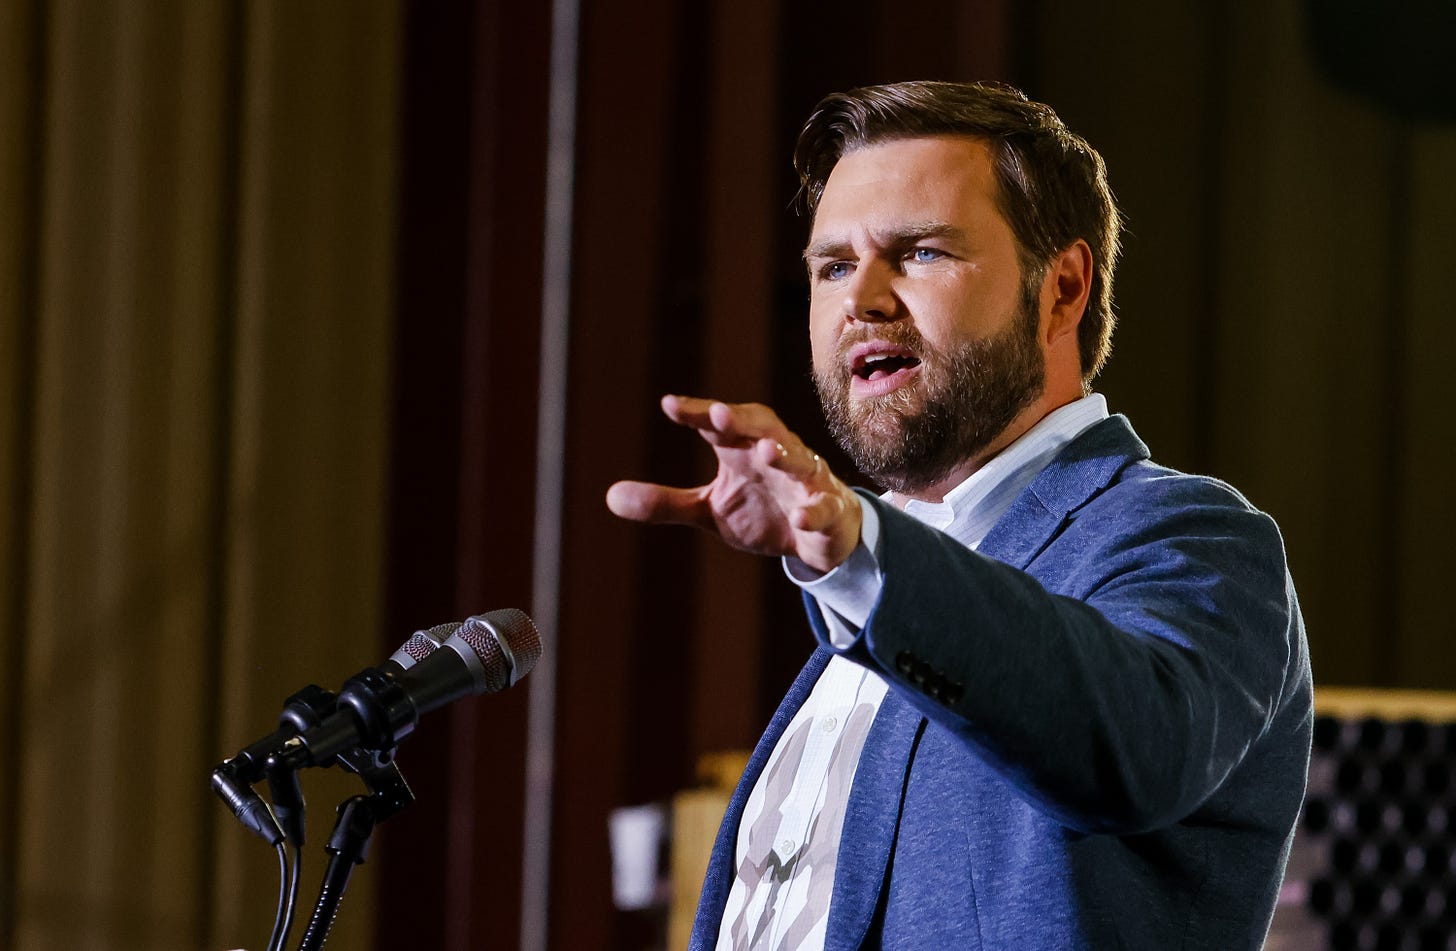 Why Ohio Senate candidate J.D. Vance is trending on Twitter today